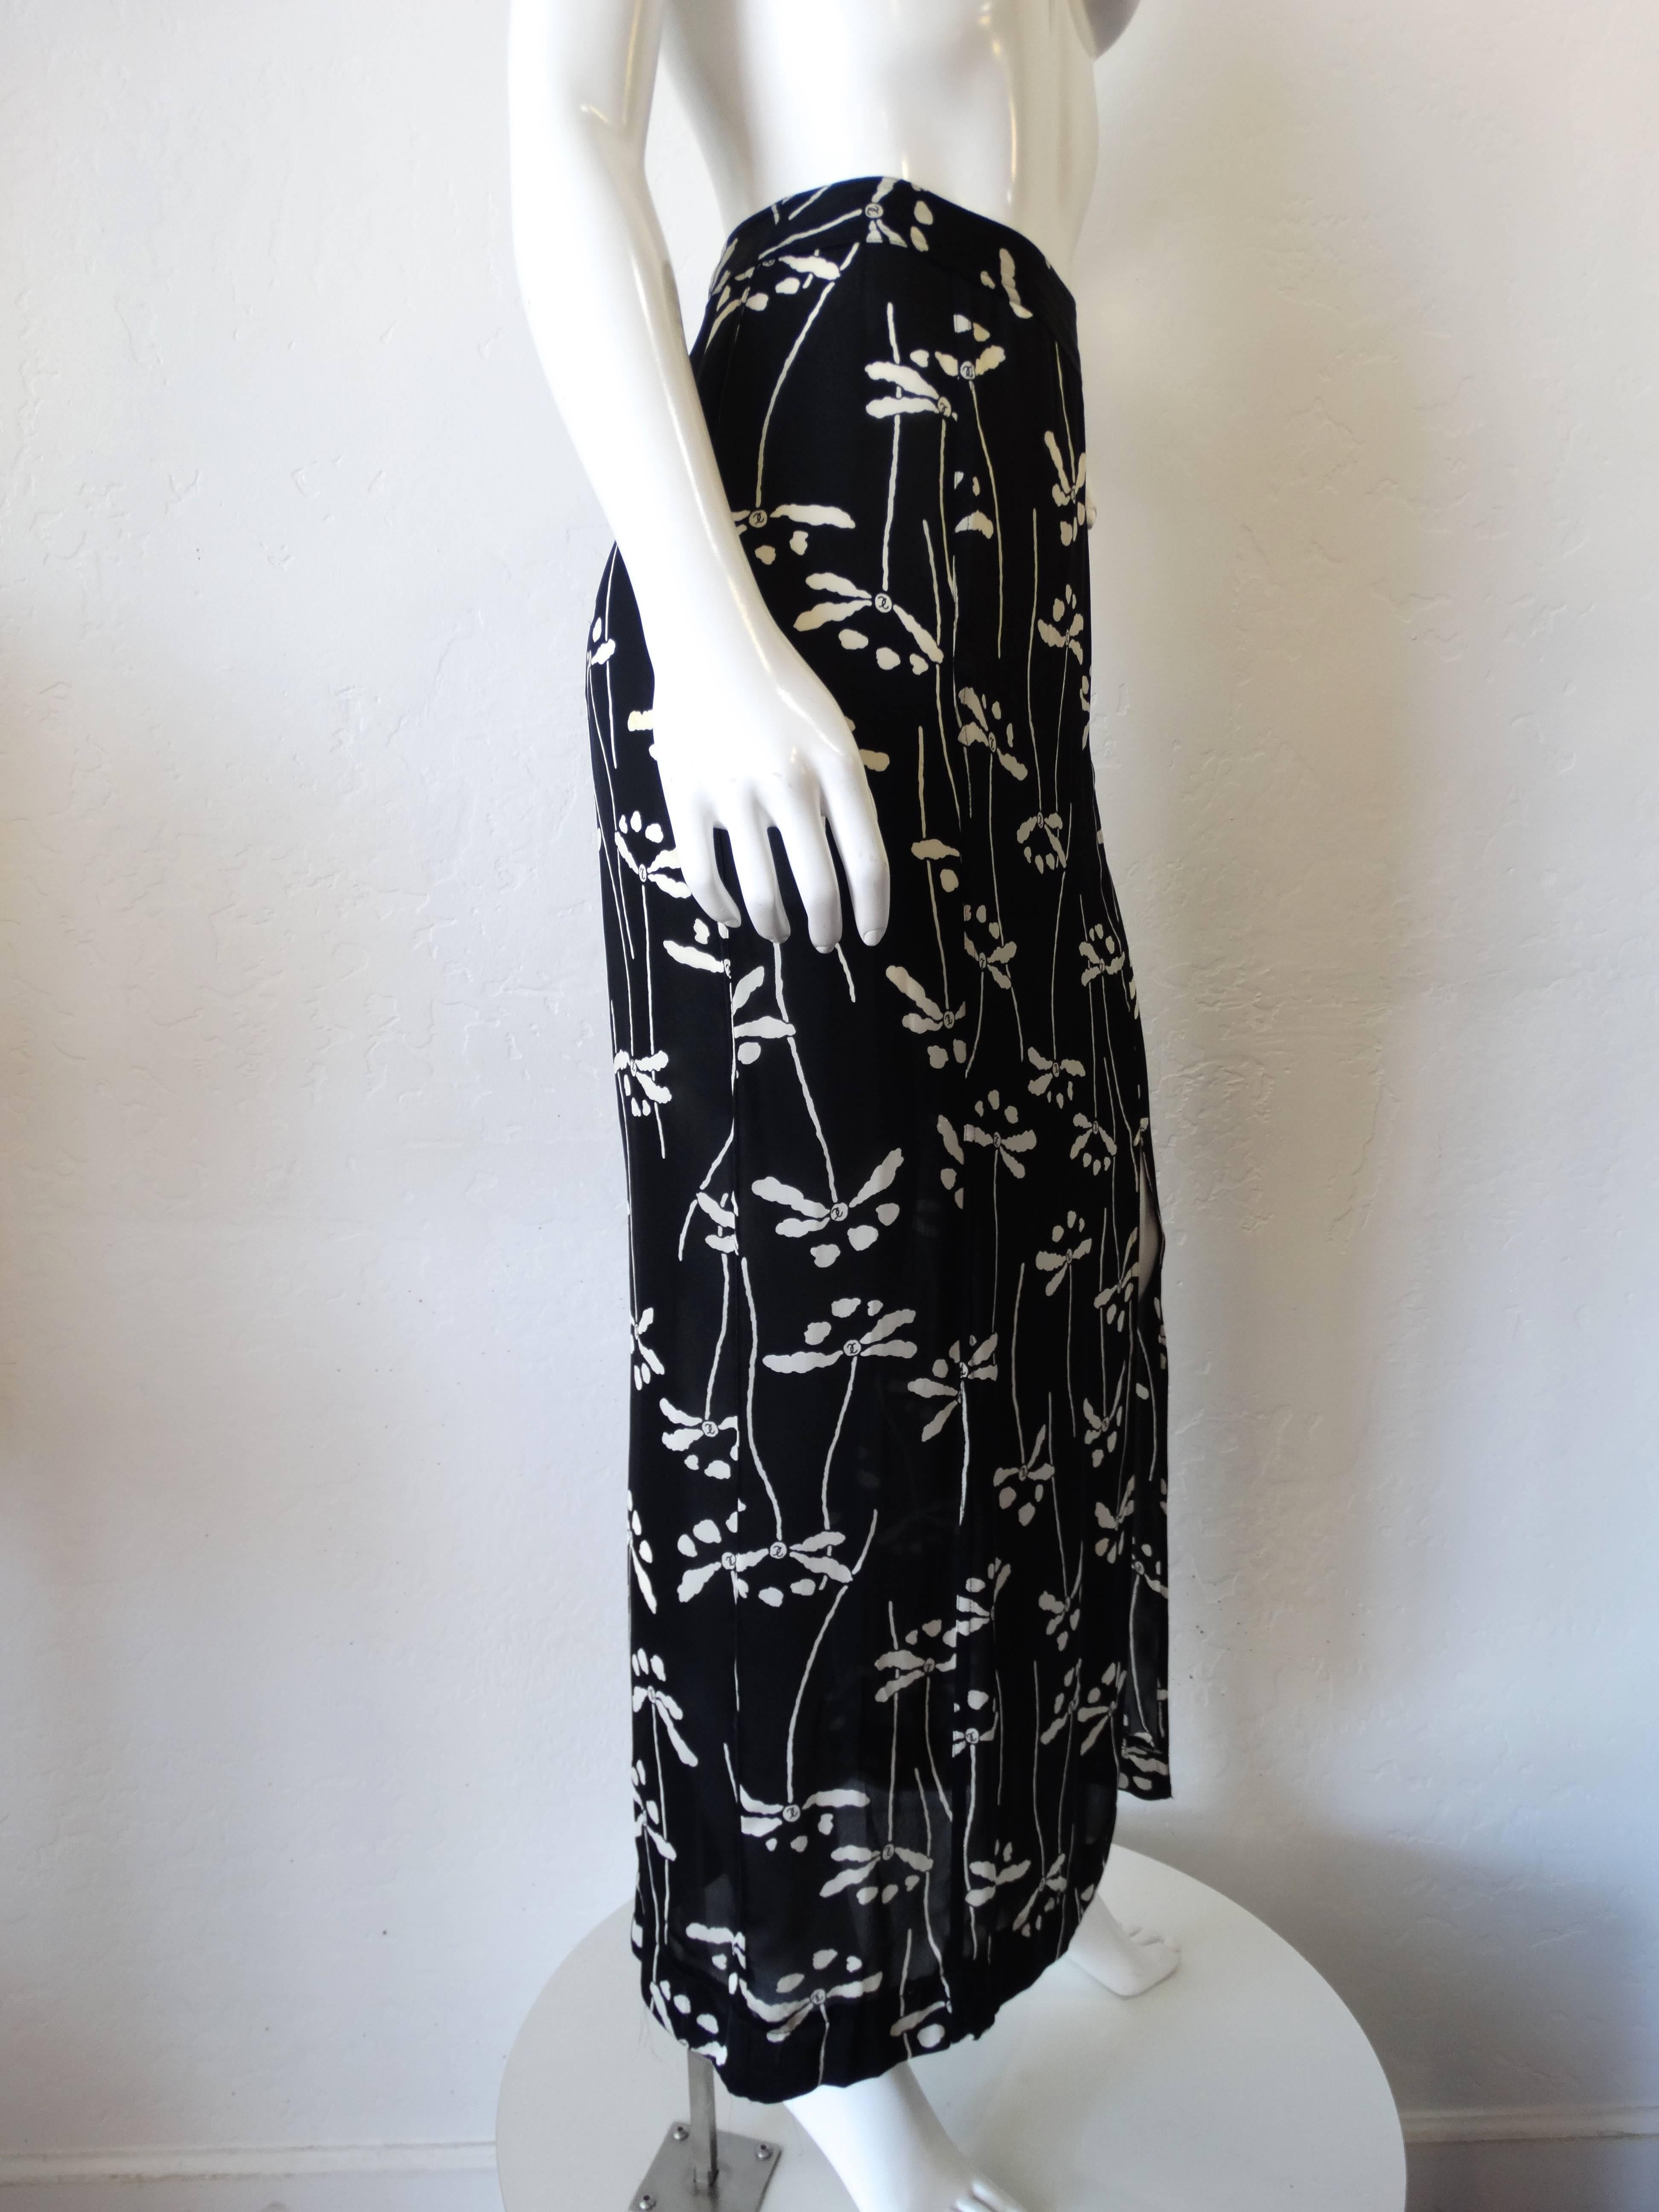 Women's Rare 1990s Chanel Black and White Floral Skirt